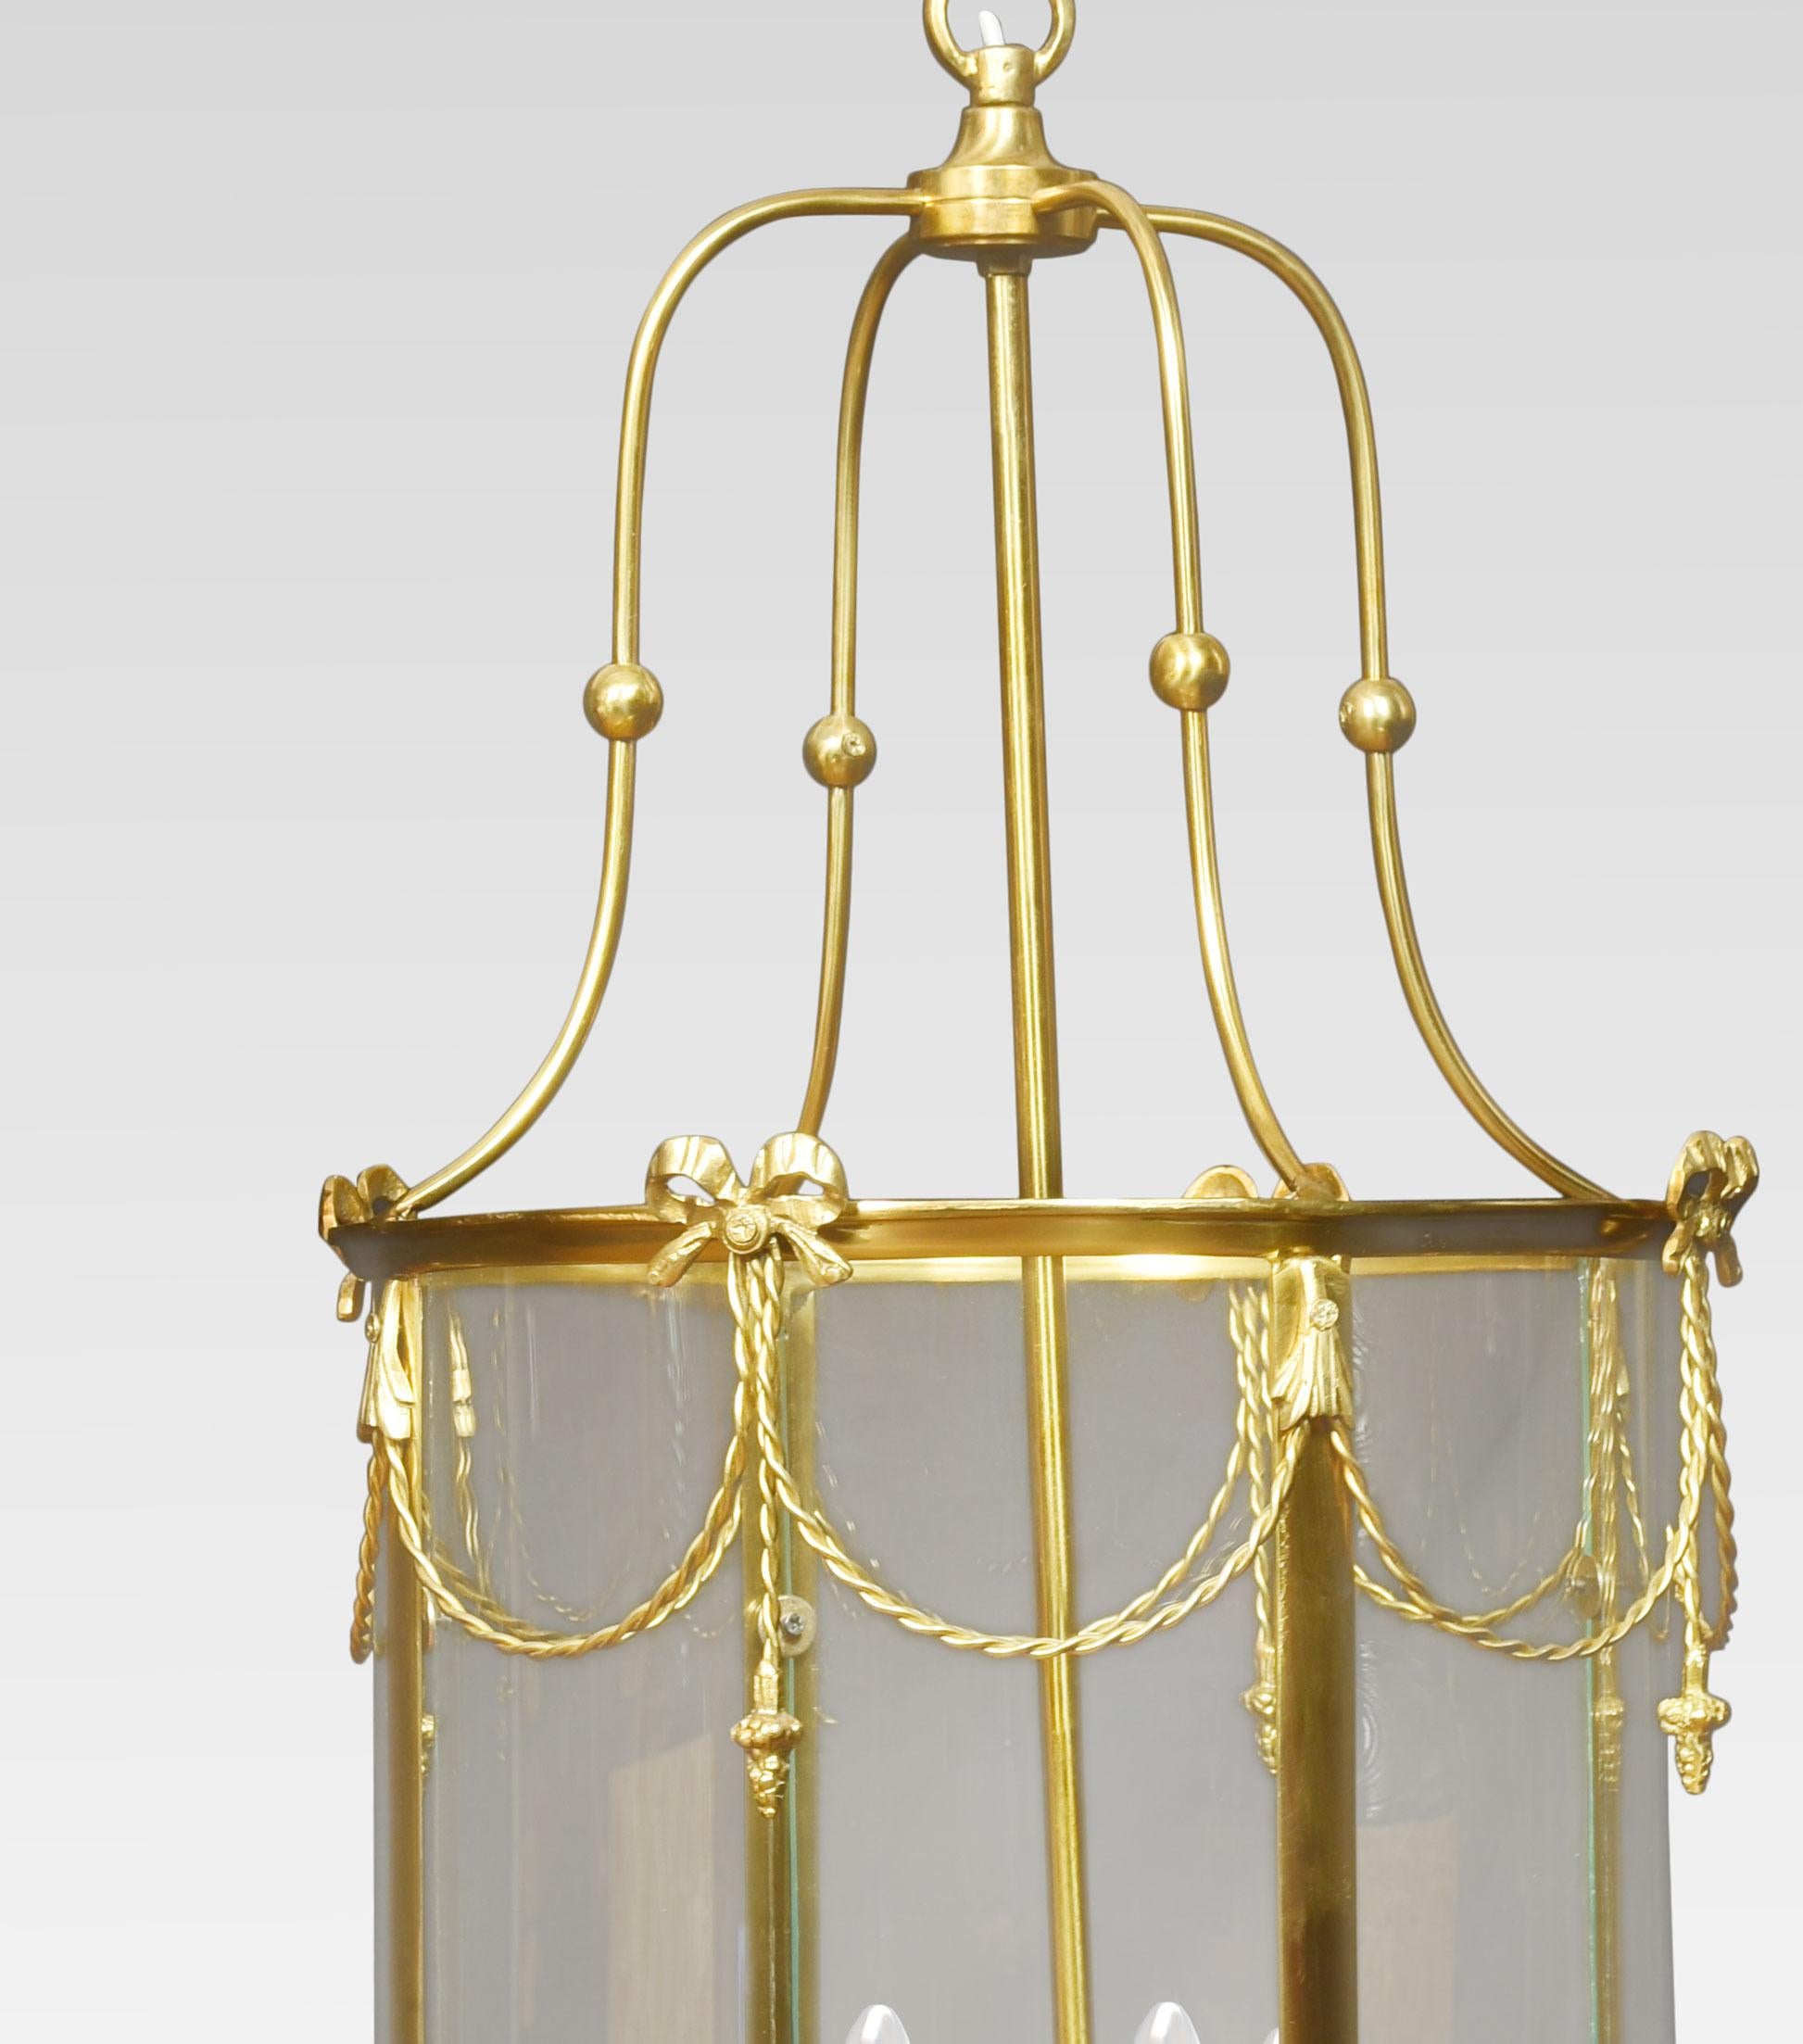 Pair of hall lanterns, the scrolling superstructure above a circular glazed body, with swag and bow decoration. enclosing a four-light electrolier. The lanterns have been rewired.
Dimensions
Height 33 Inches
Width 16.5 Inches
Depth 16.5 Inches